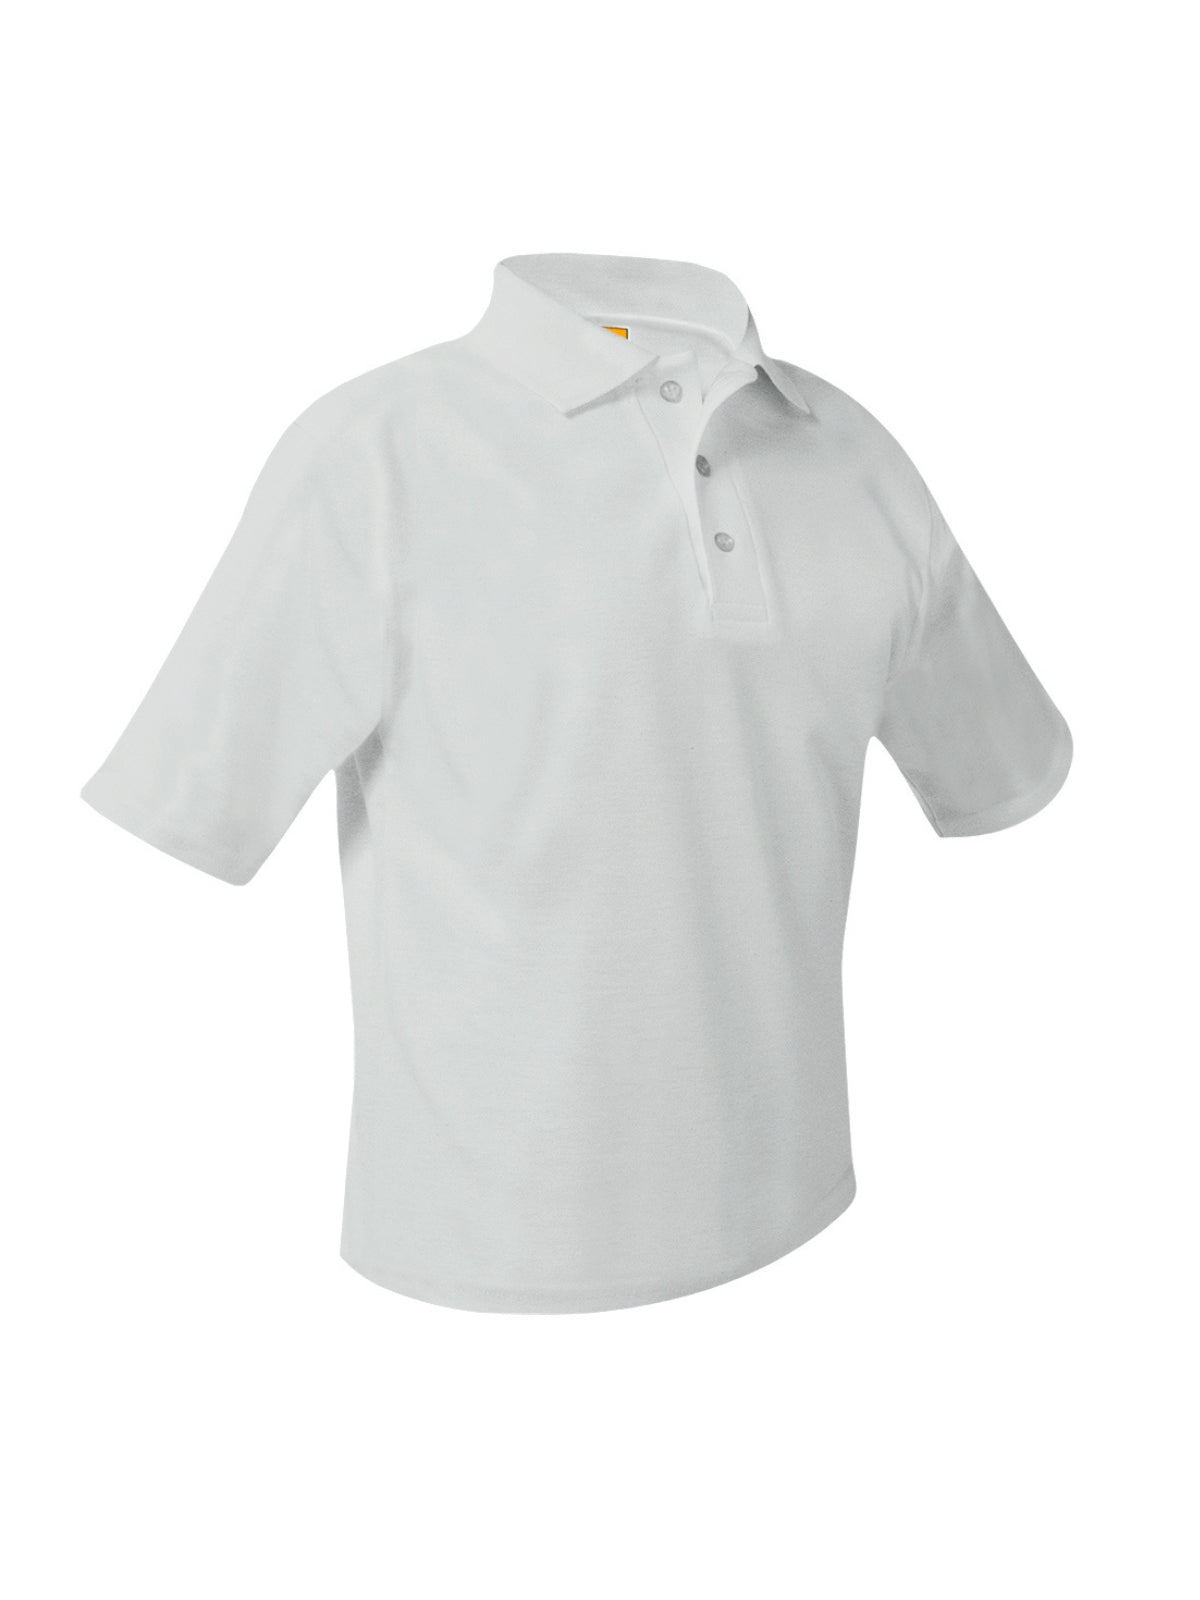 Unisex Adults and Kids Polo - 8760 - White